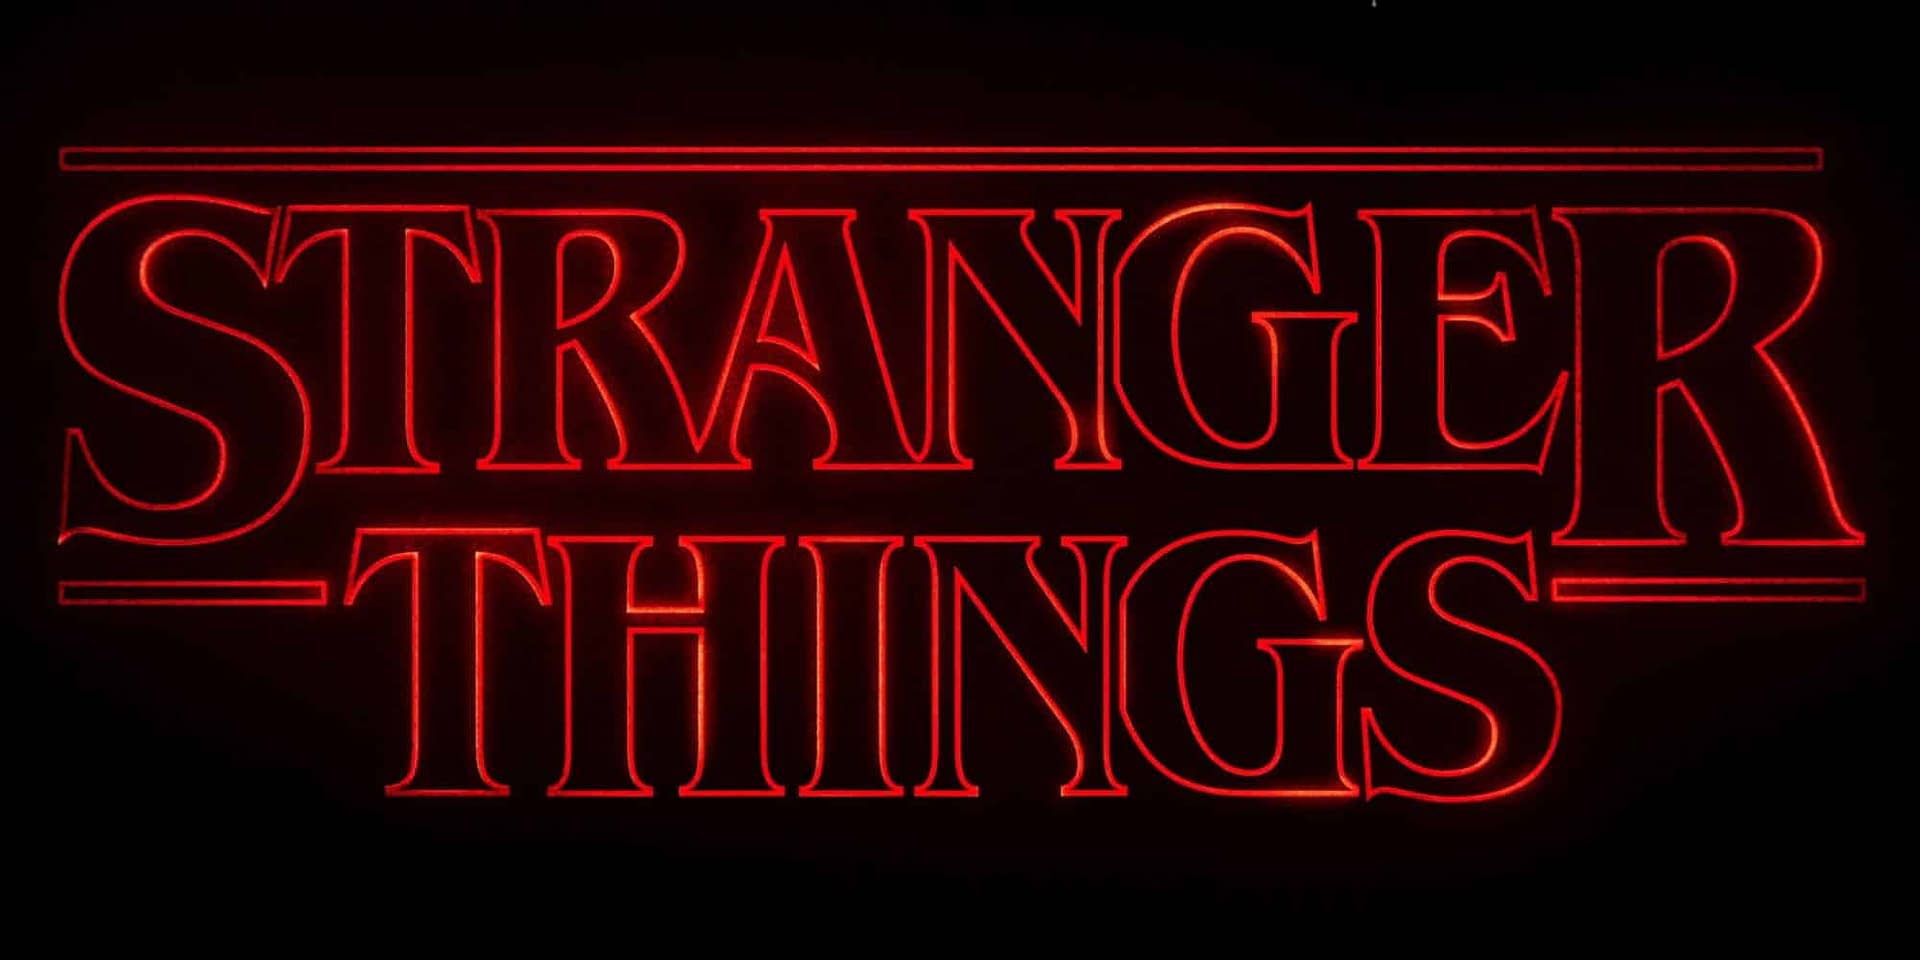 More of Chief Hopper's Backstory Coming in 'Stranger Things' Season 3?